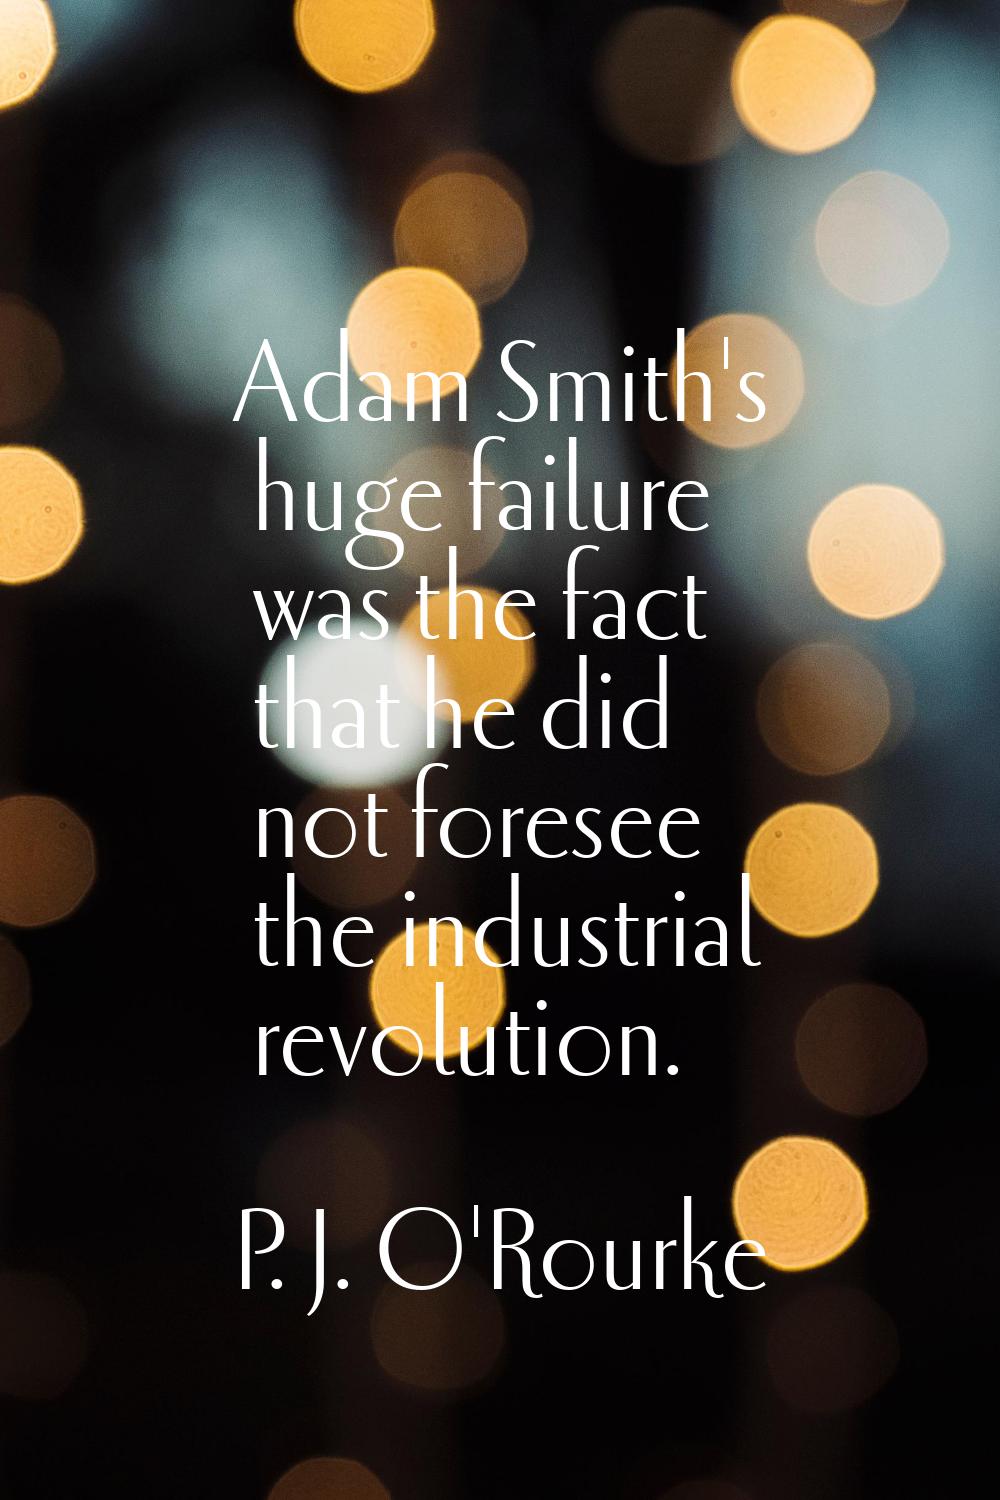 Adam Smith's huge failure was the fact that he did not foresee the industrial revolution.